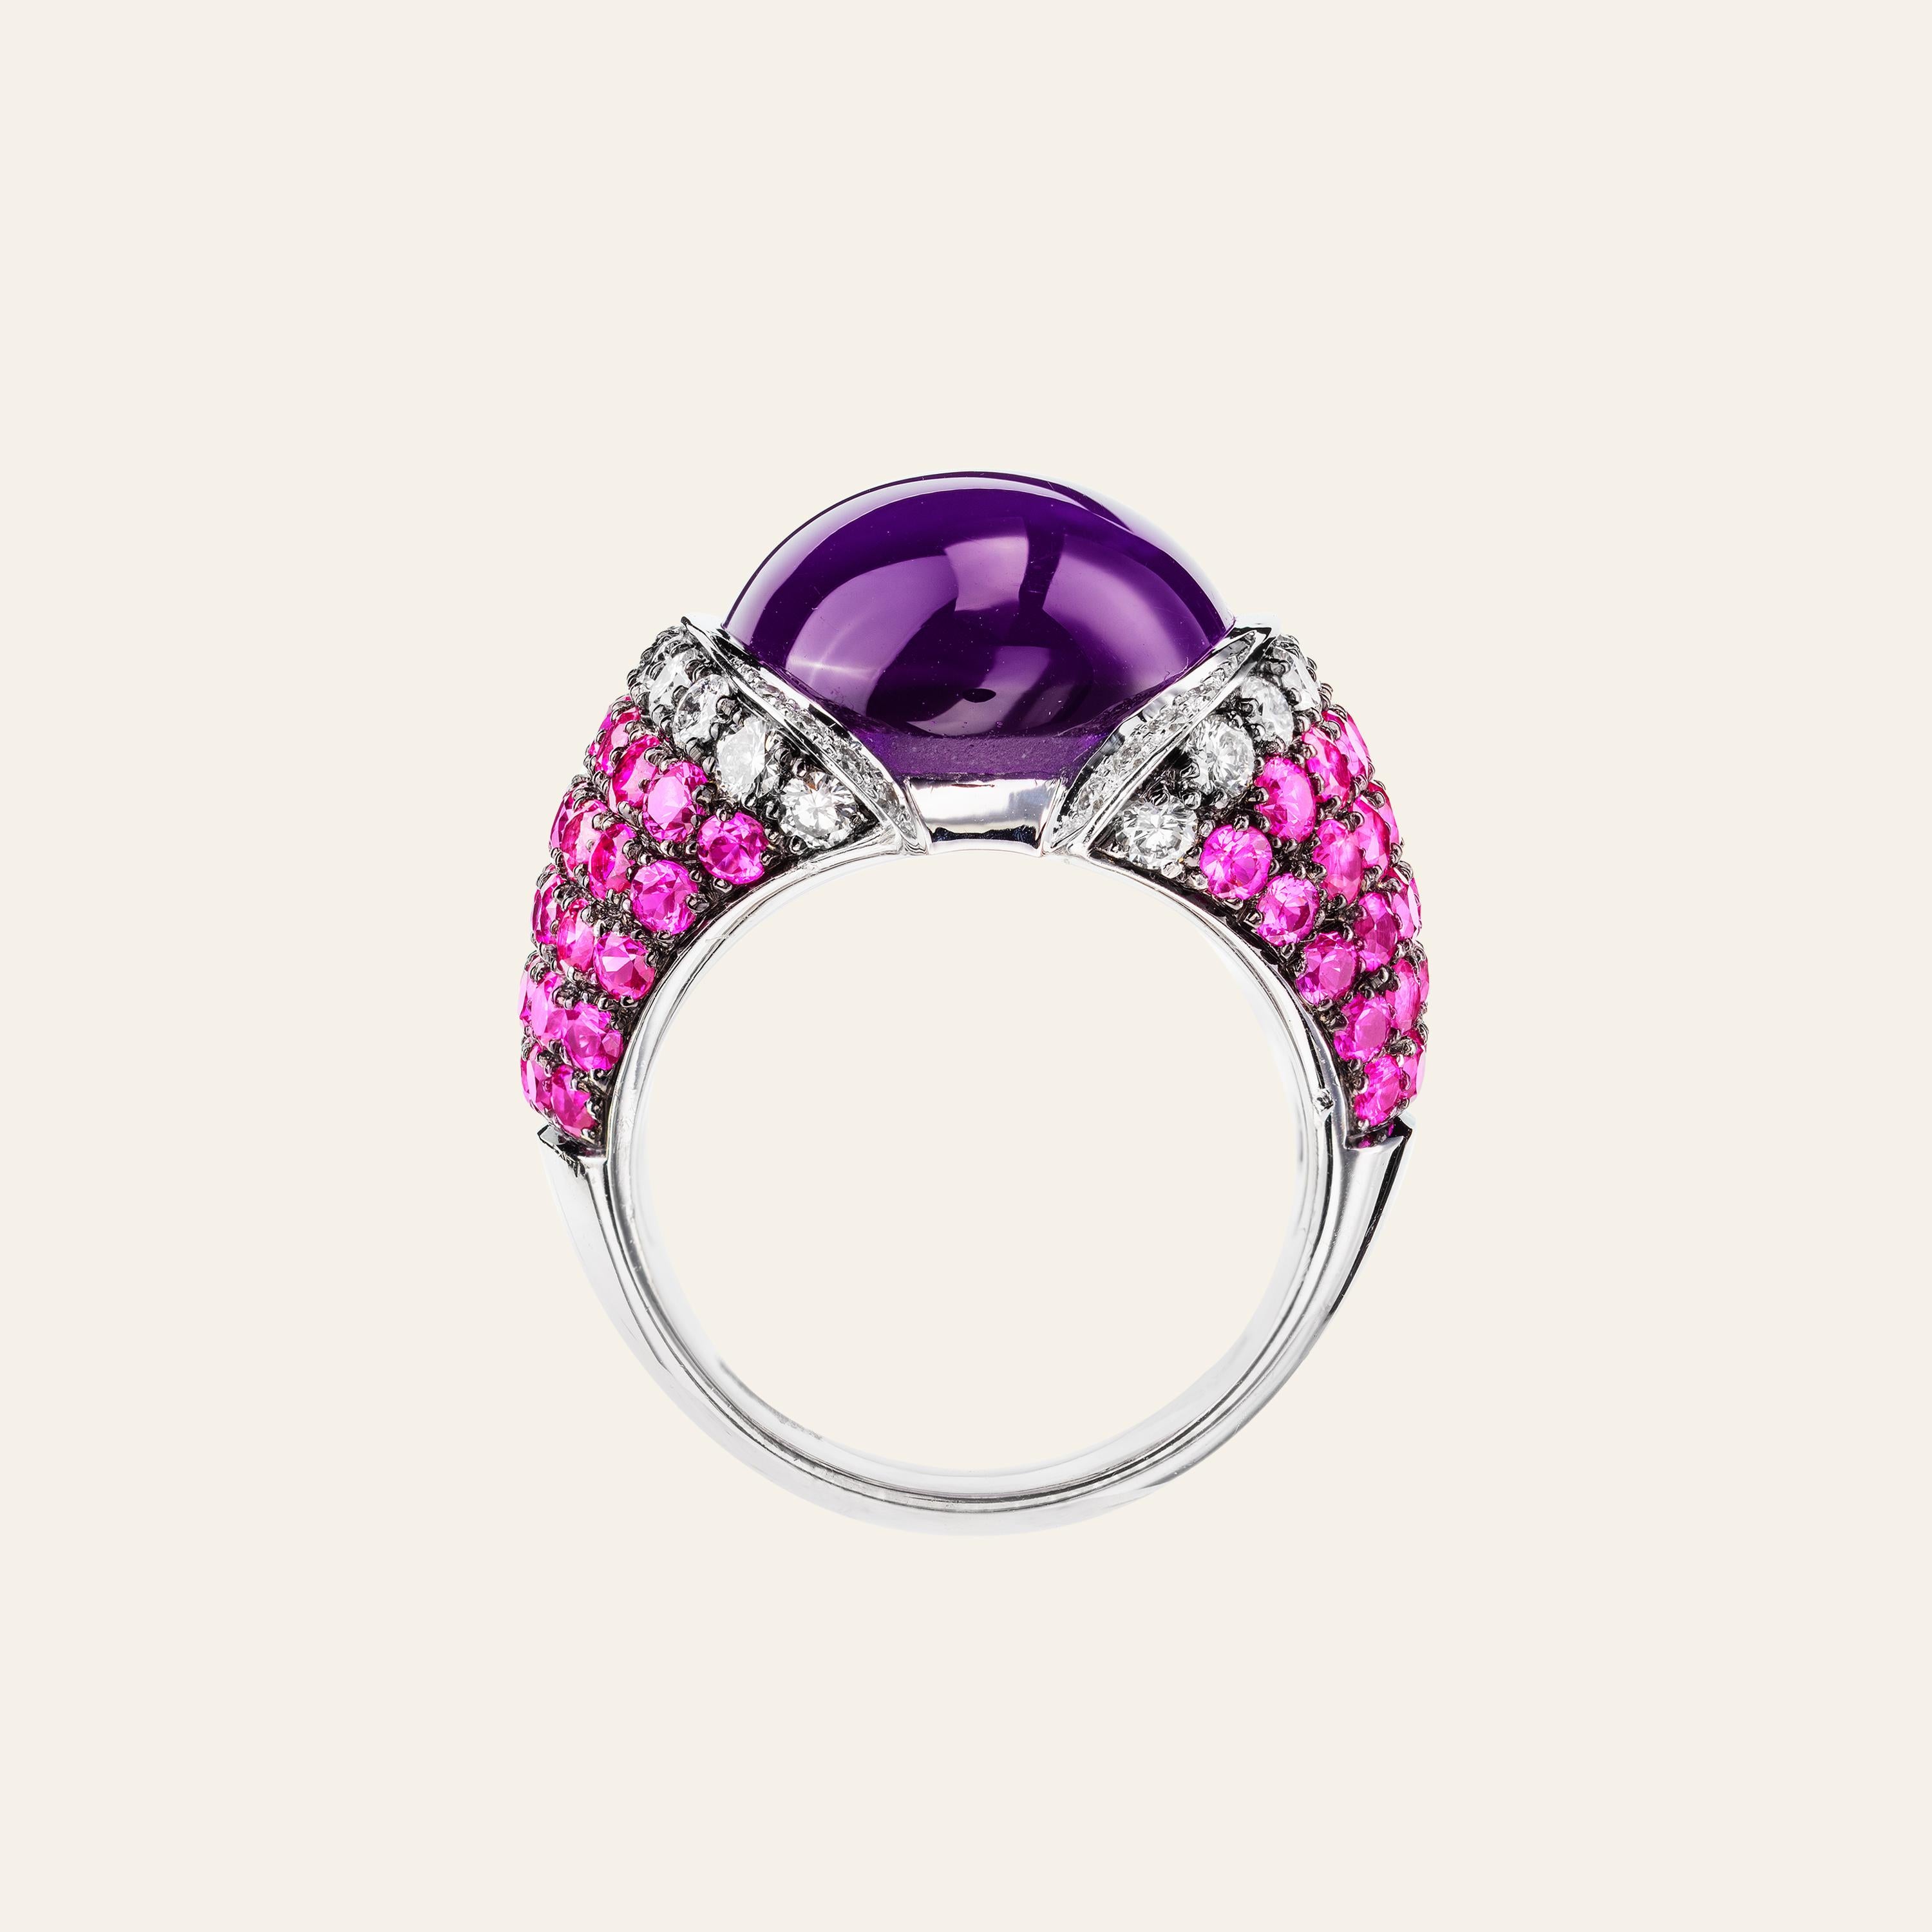 Cabochon Sabbadini Jewelry Pink and Purple Amethyst Cocktail Ring For Sale